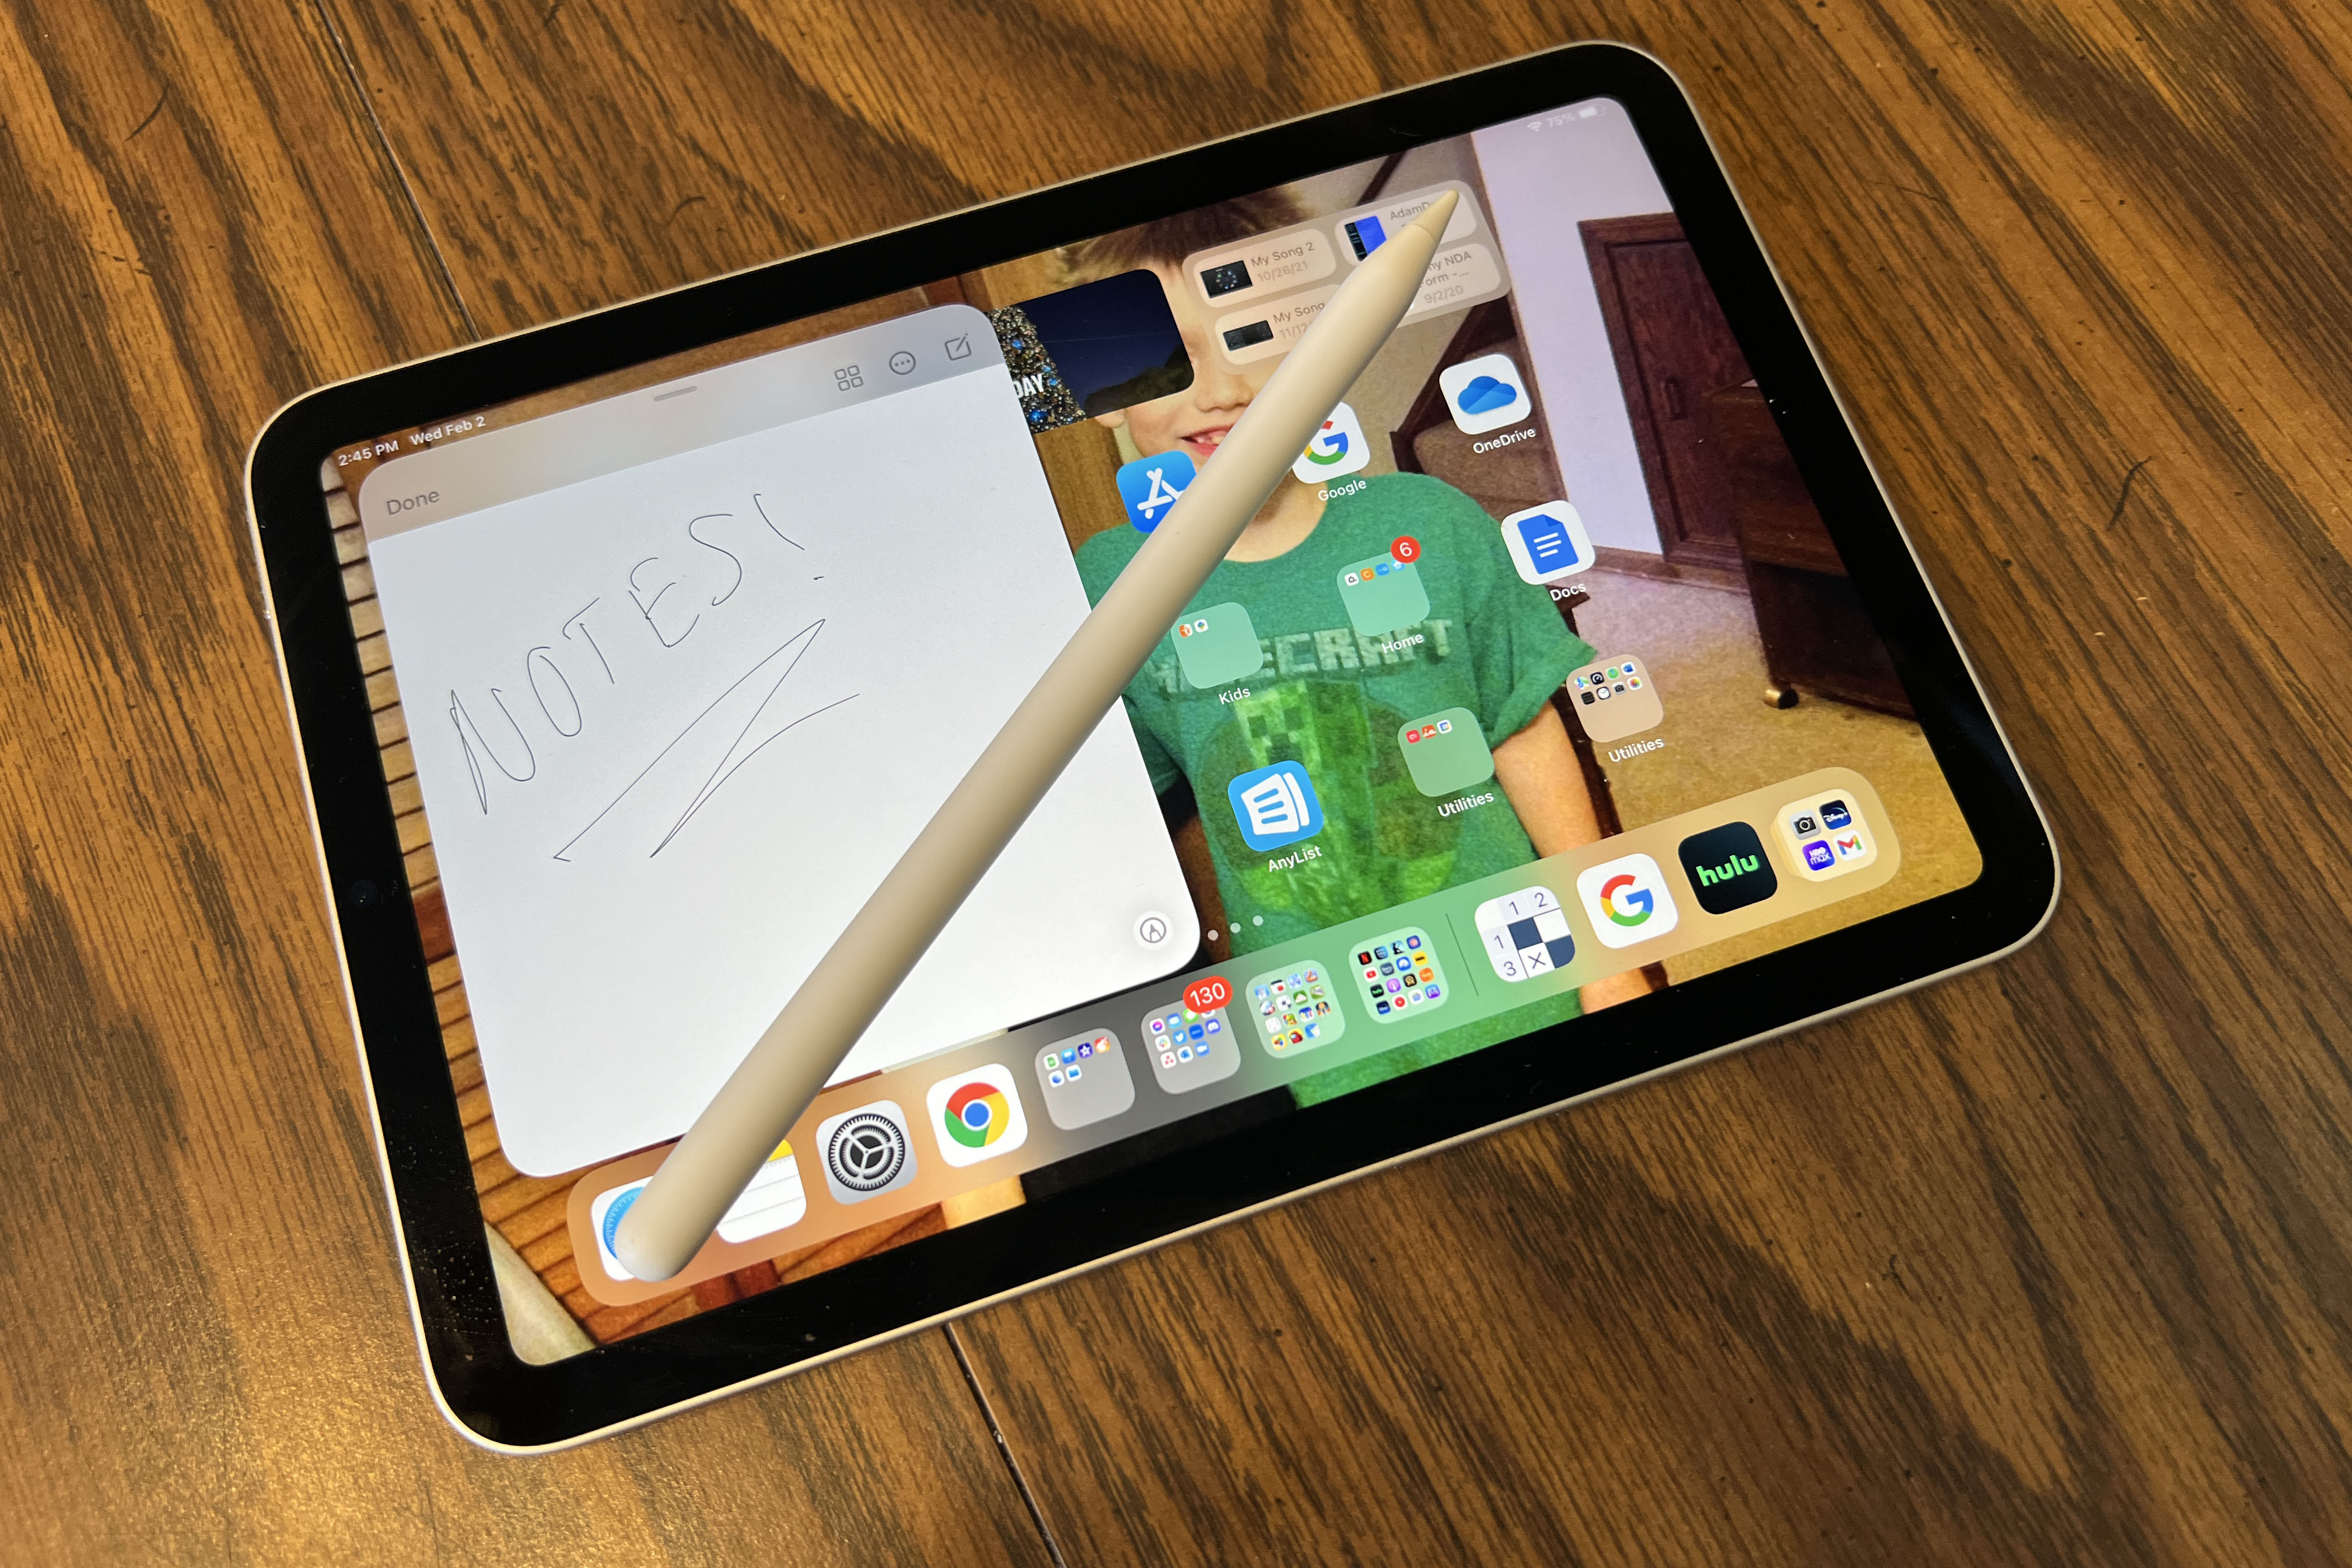 iPad mini (2021) long-term review: Bigger than it actually is